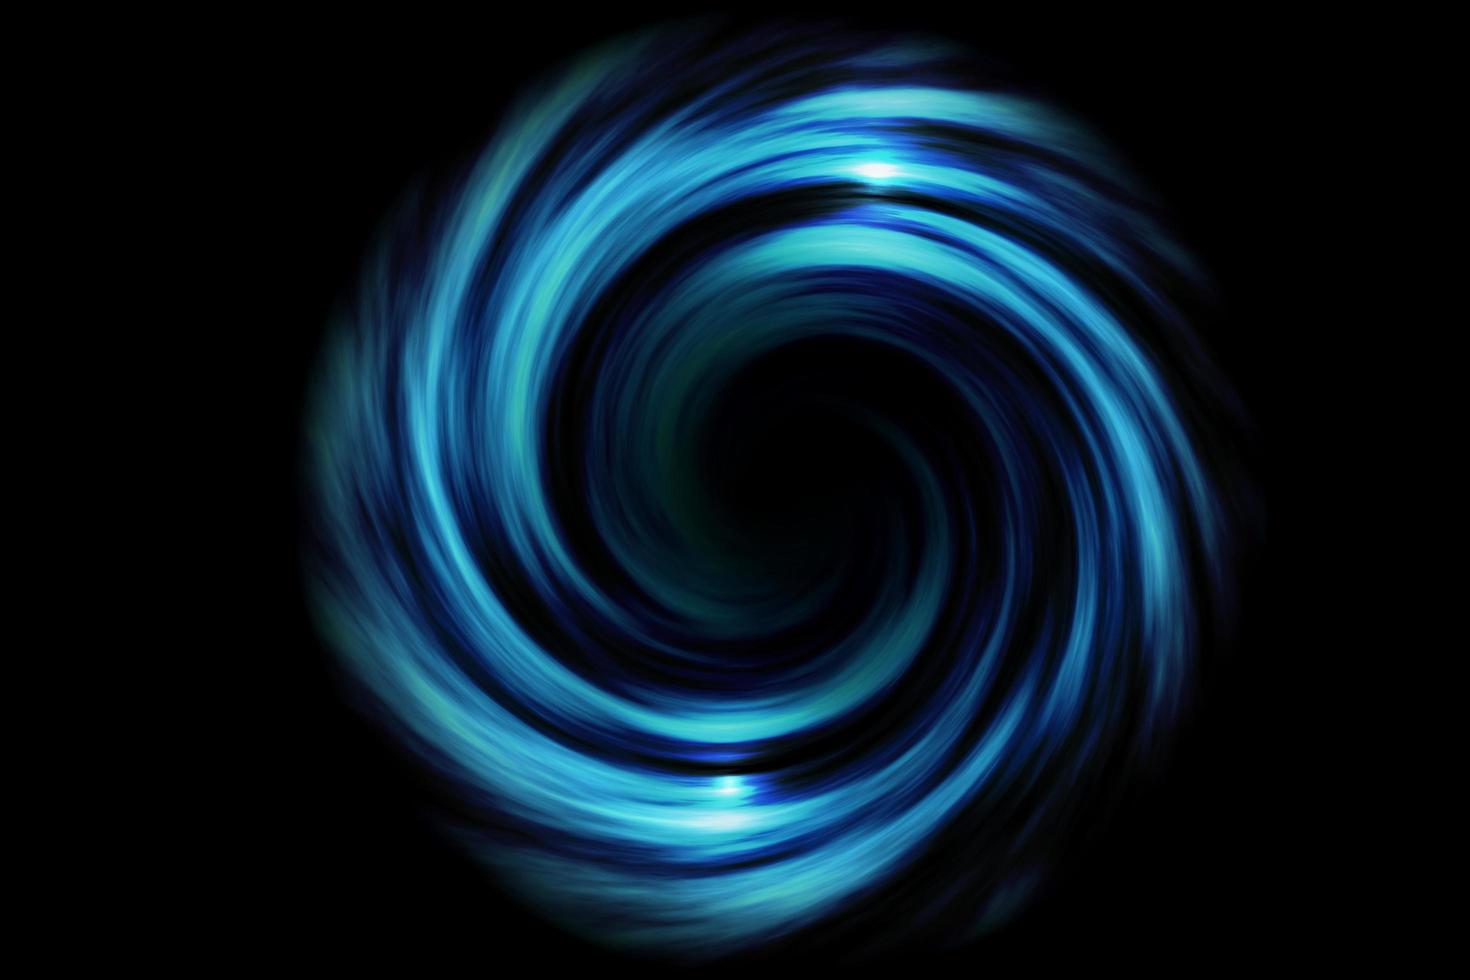 Abstract spiral fog on black background photo